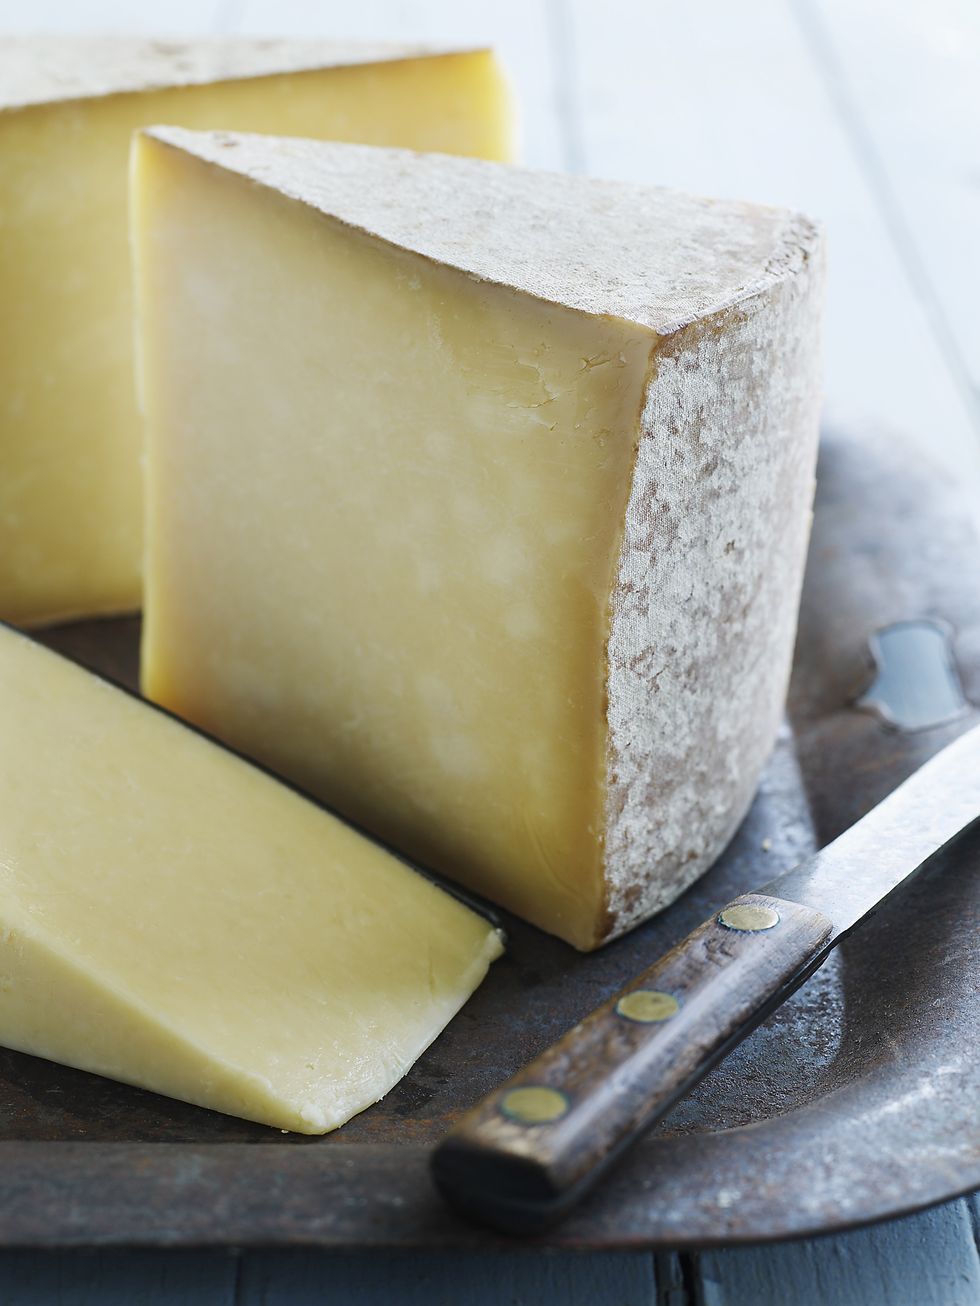 Tips for Storing Cheese So It Stays Funky (In a Good Way)